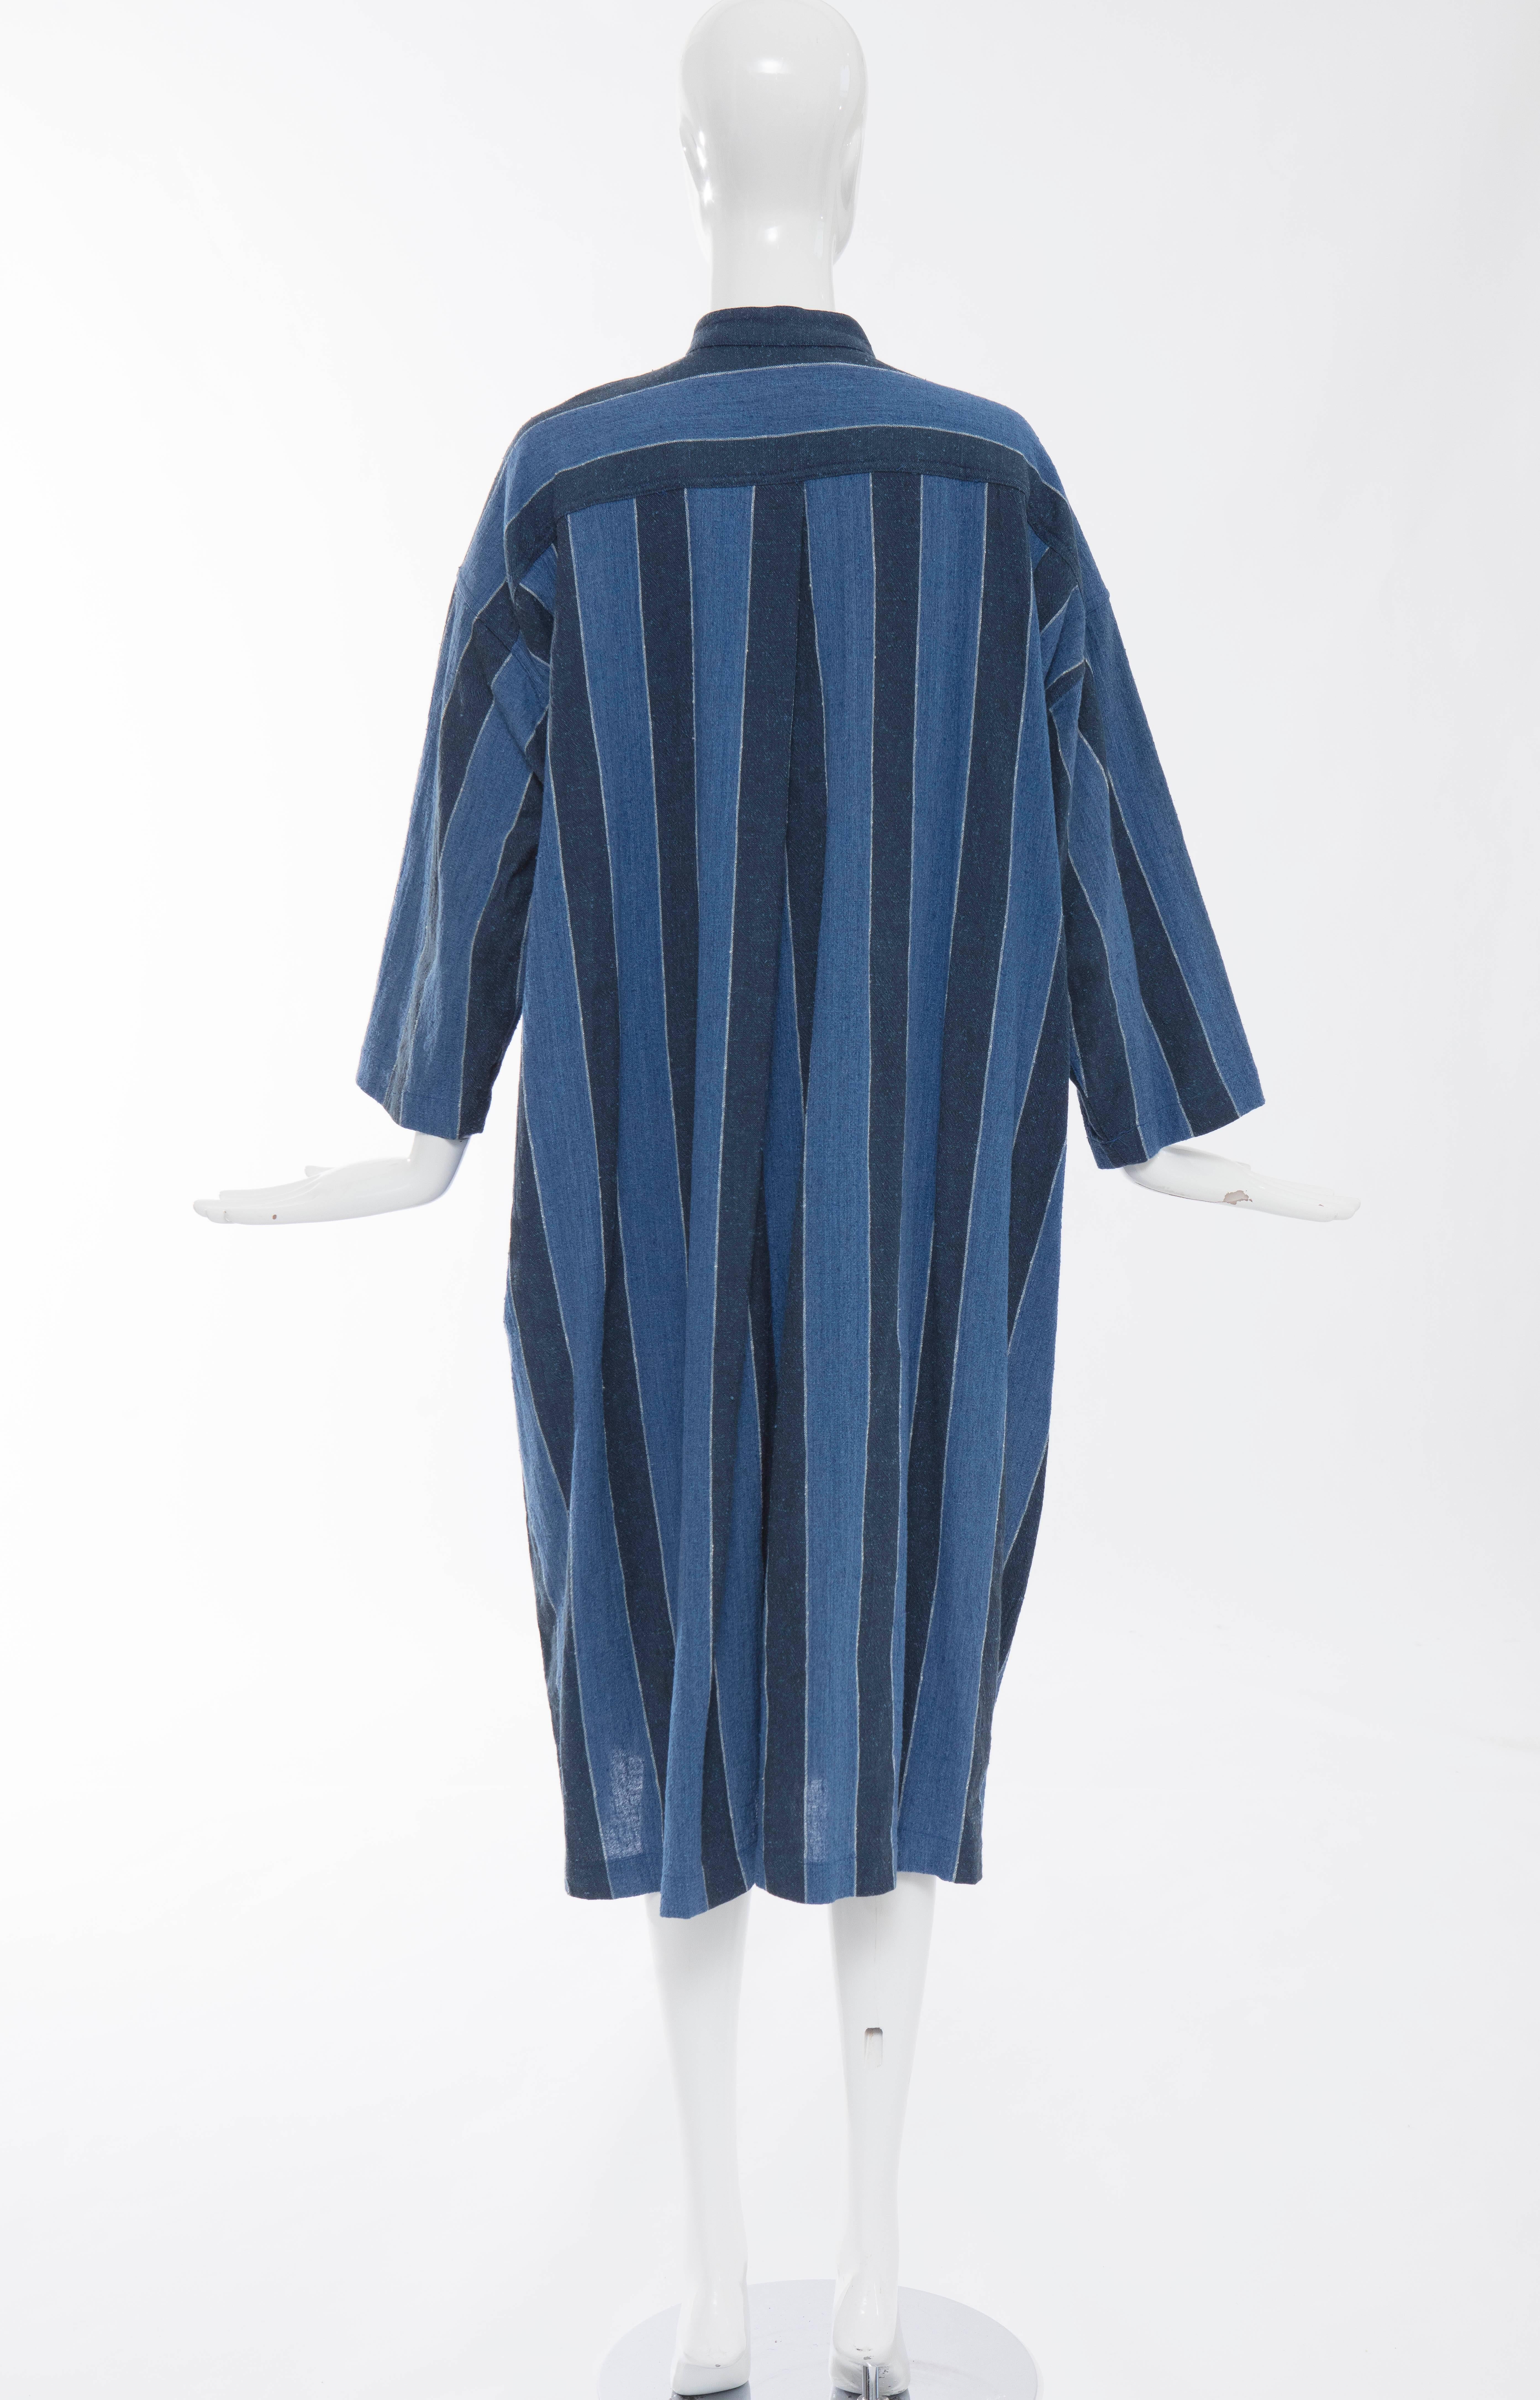 Issey Miyake Plantation, circa 1980's blue striped button front woven cotton dress with three front pockets.

Japan: Small

Bust 52, Waist 50, Hips 50, Length 46, Sleeve 16